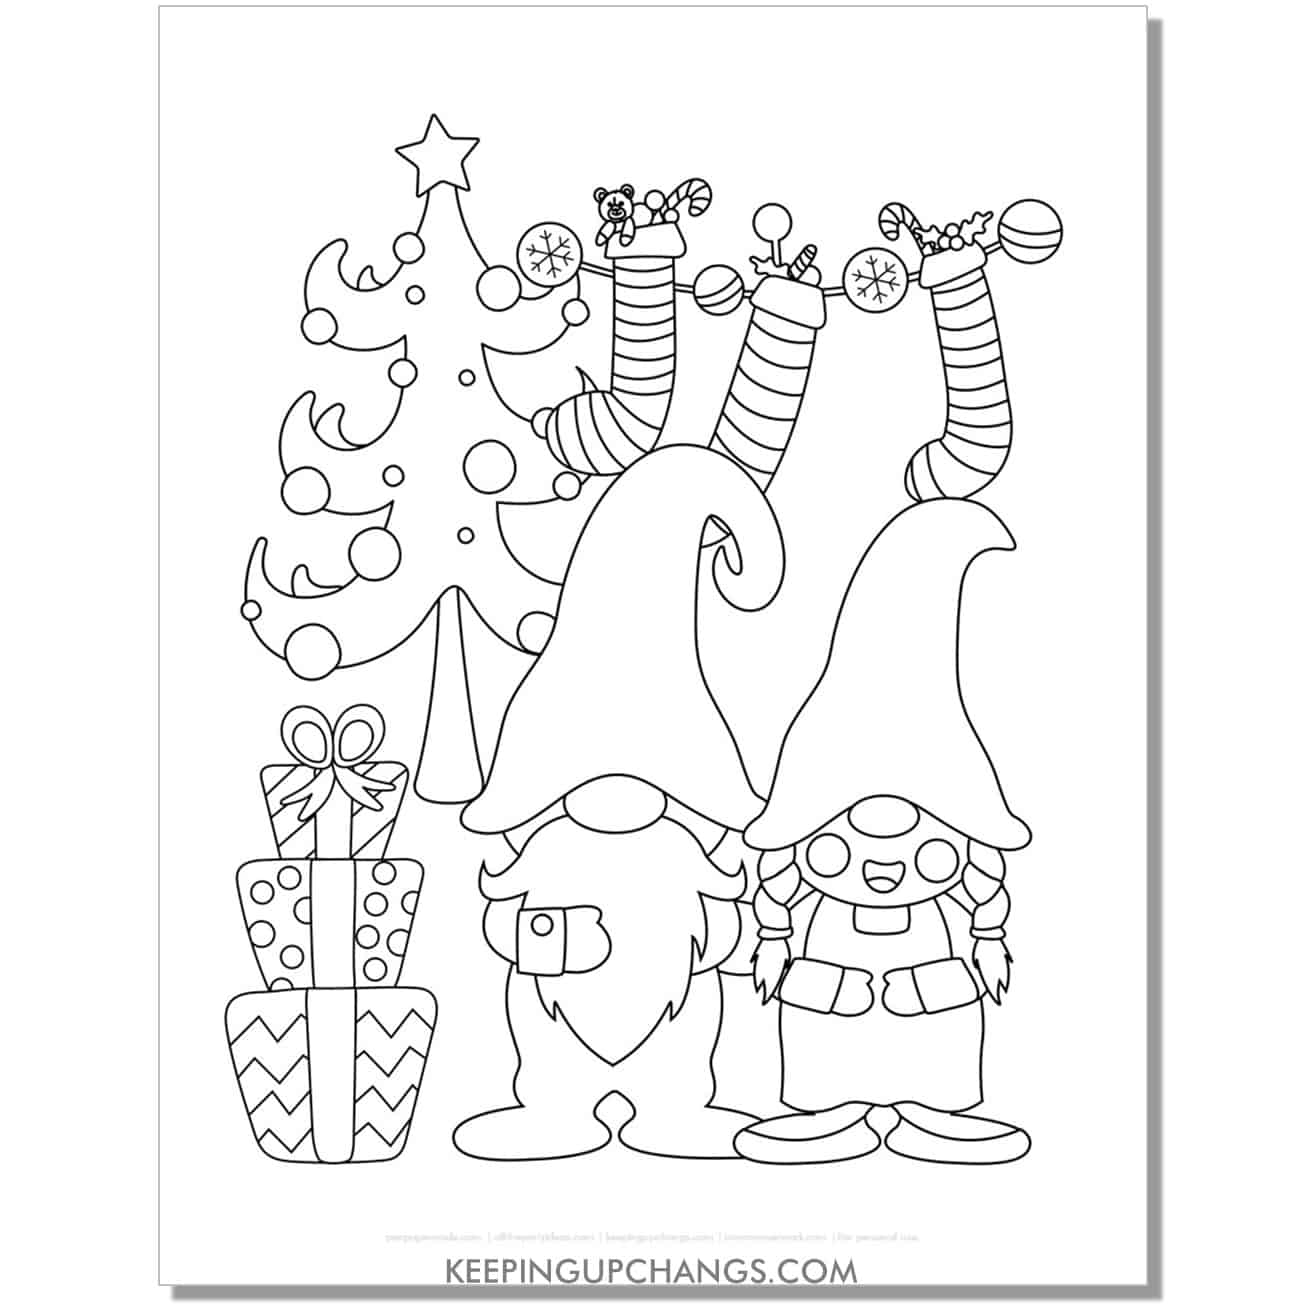 free cute christmas gnome couple with tree, stockings, presents coloring page.